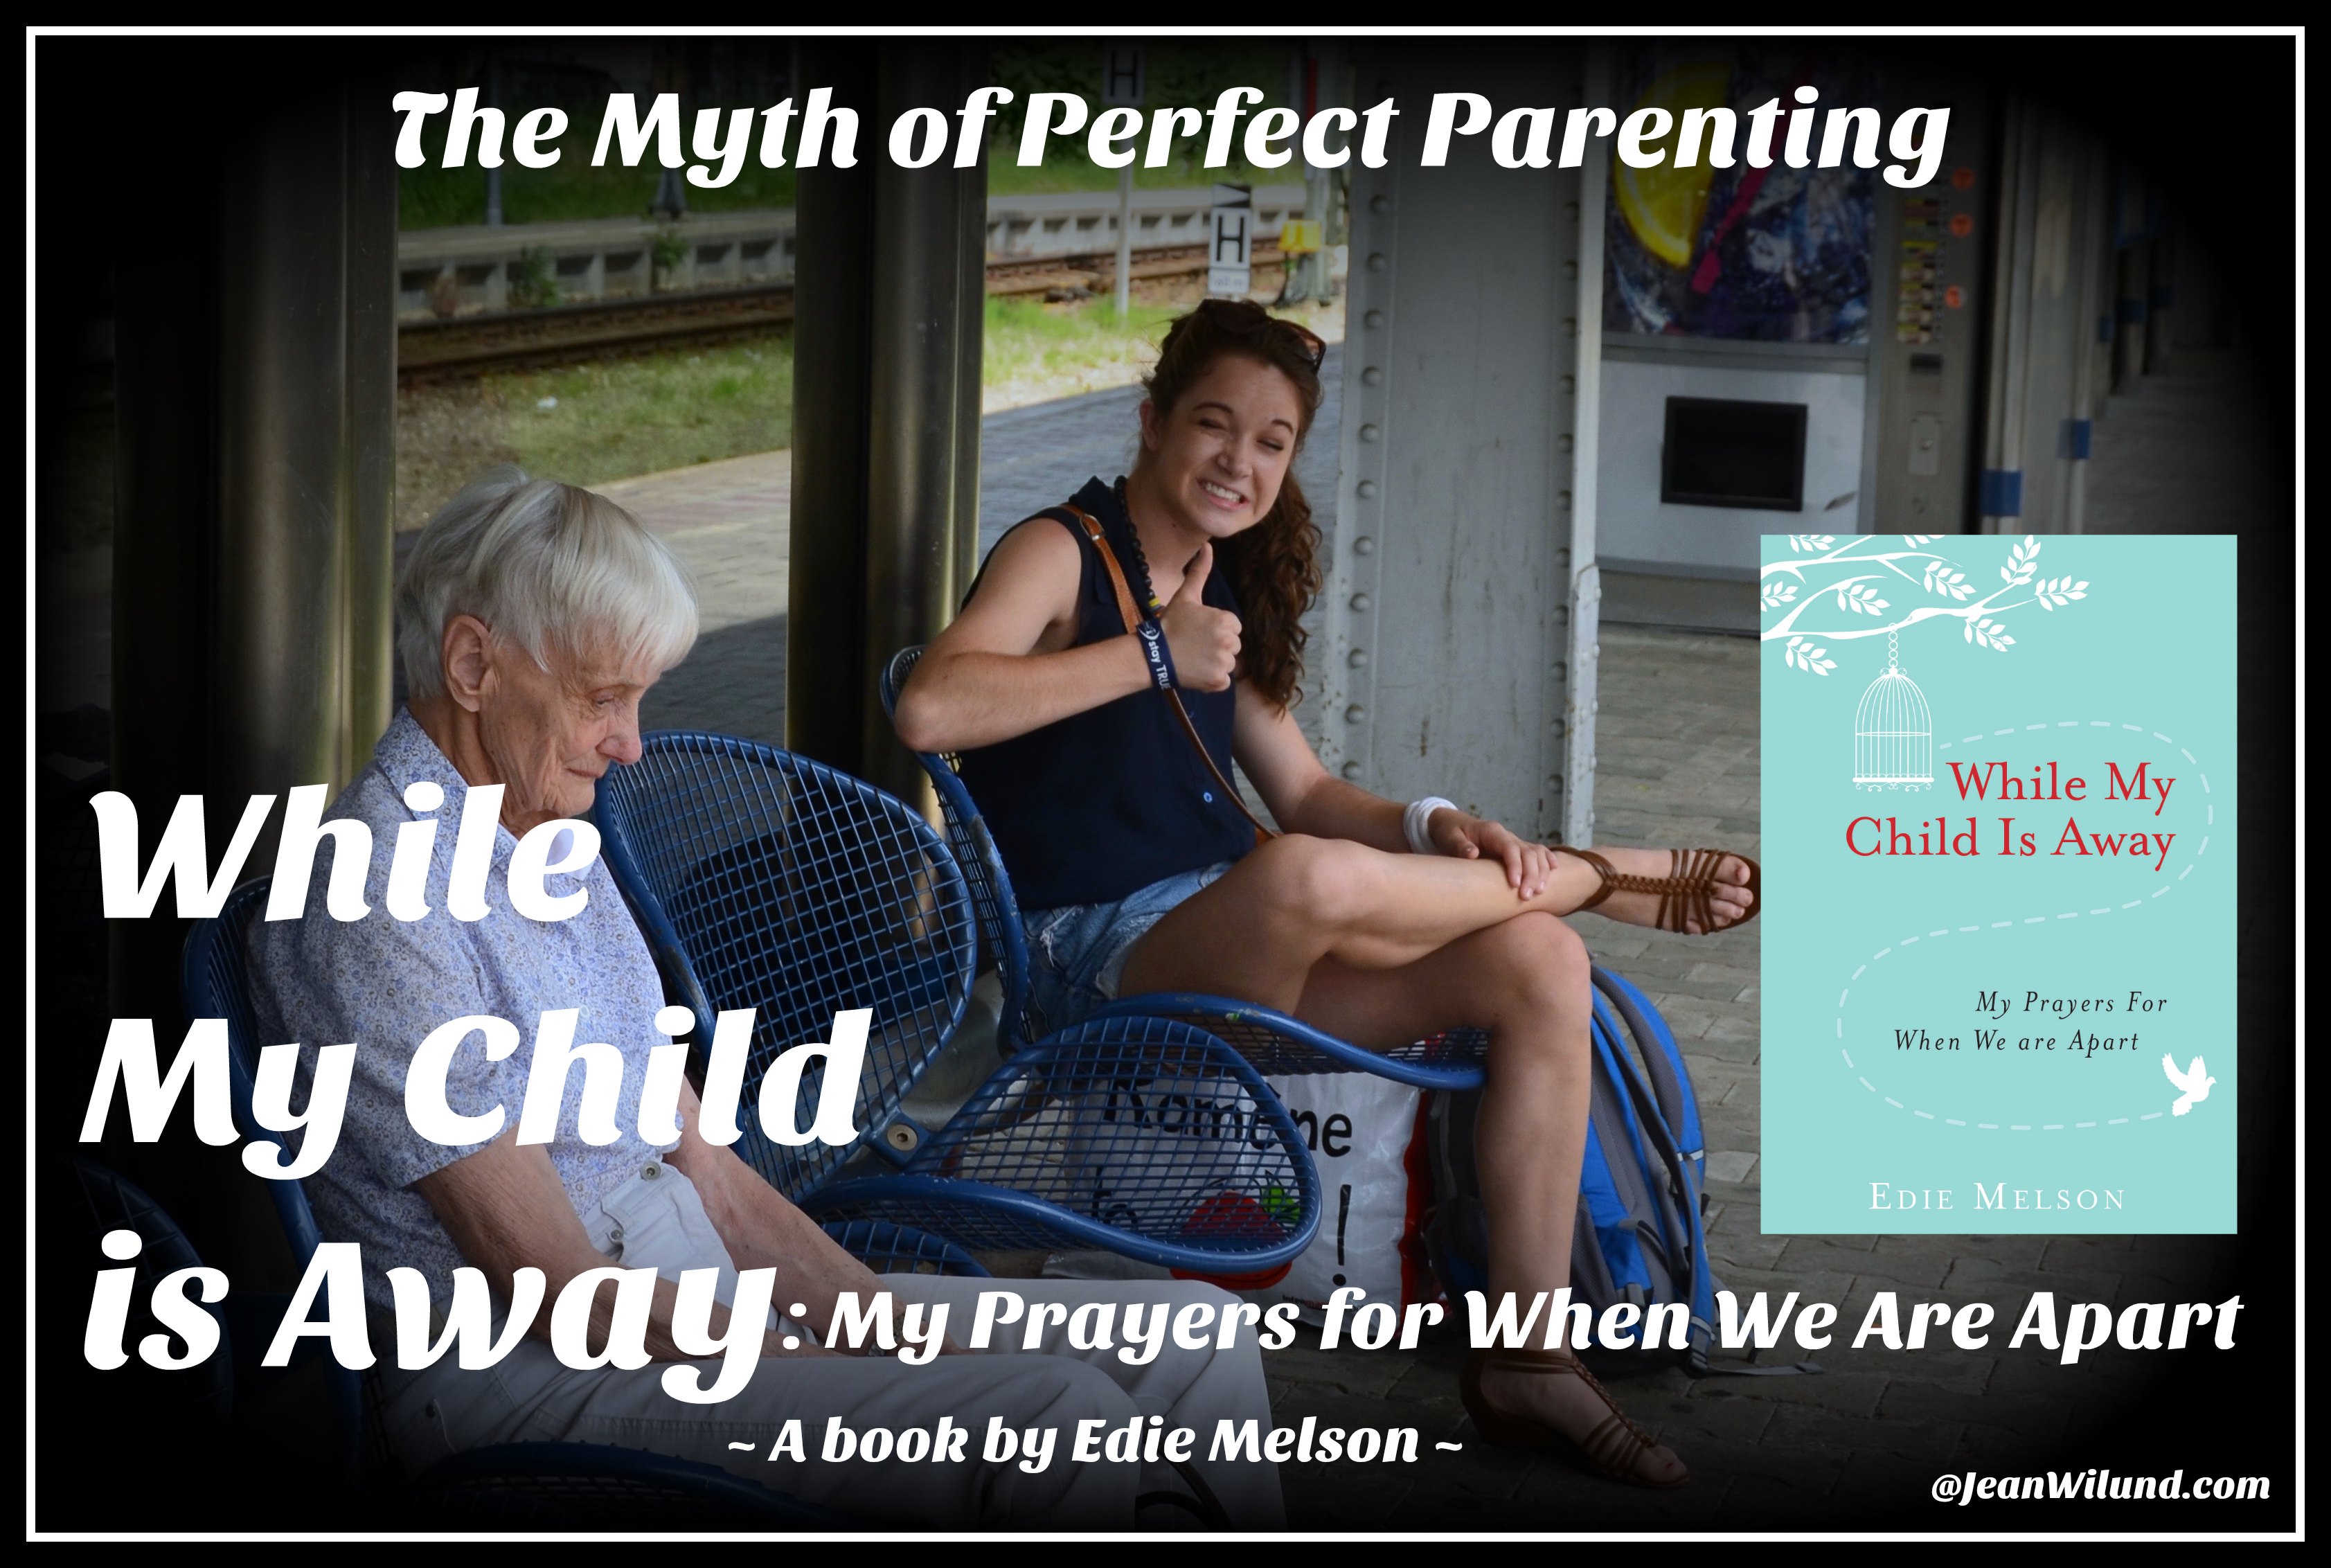 The myth of perfect parenting. Learn how best to pray while your child is away in While My Child is Away (a book by Edie Melson) Interview by Jean Wilund